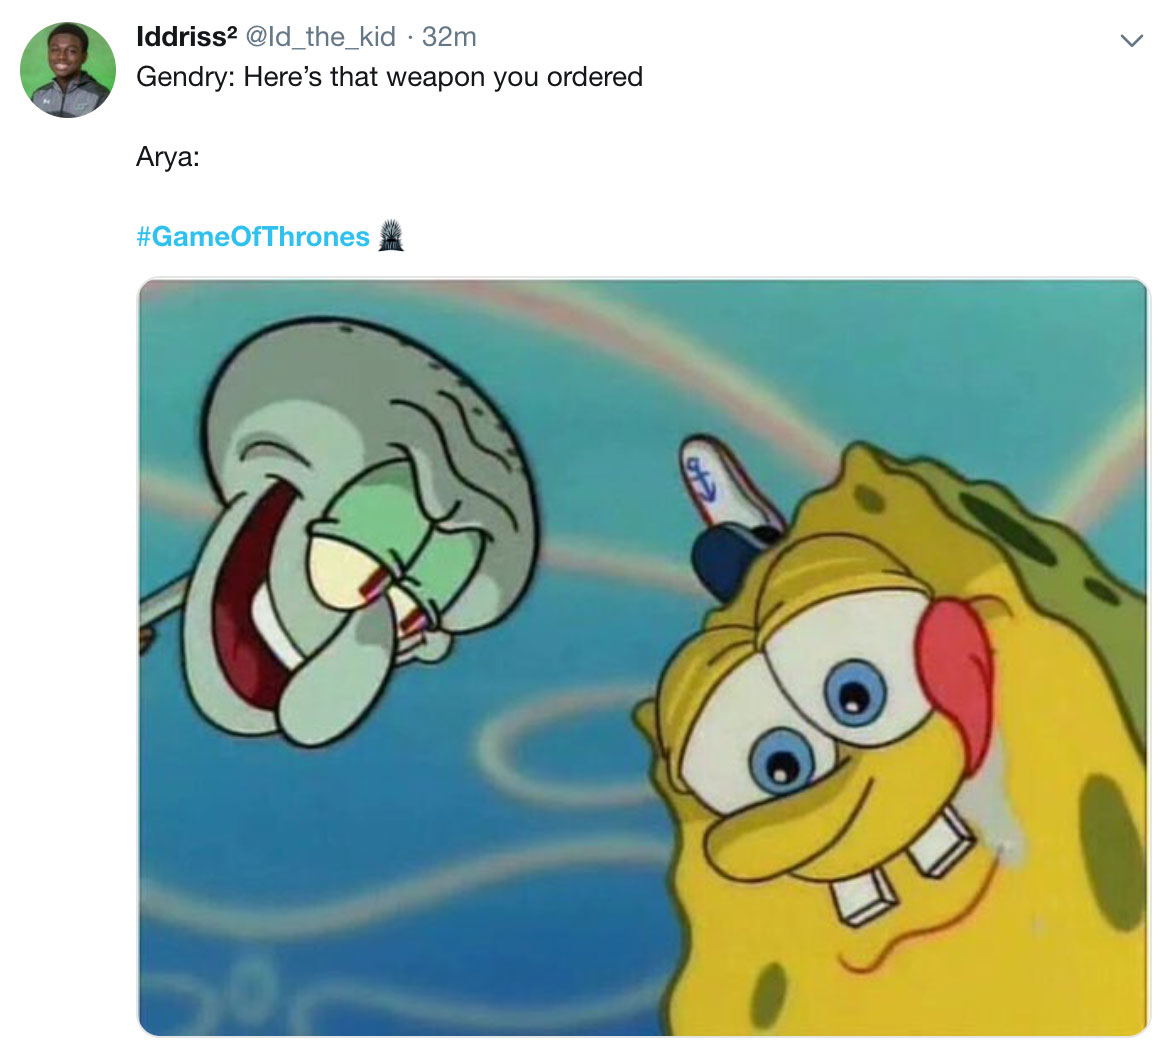 Game of Thrones Season 8 Episode 2 Meme - Spongebob licking his lips and squidward looking ominous with the text 'gendry here's that weapon you ordered'